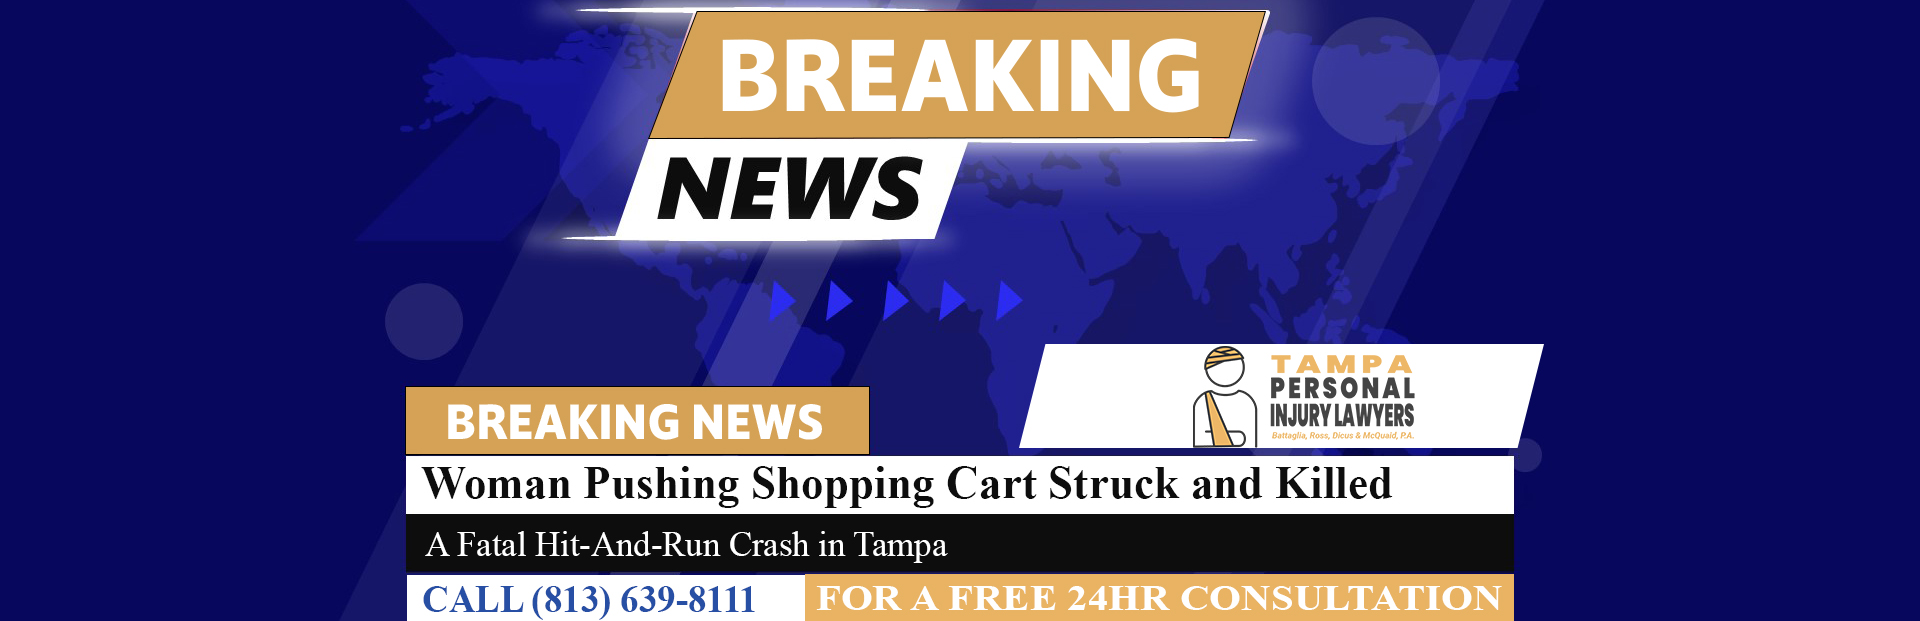 [01-10-24] Woman Pushing Shopping Cart Struck and Killed by Hit-And-Run Driver in Tampa